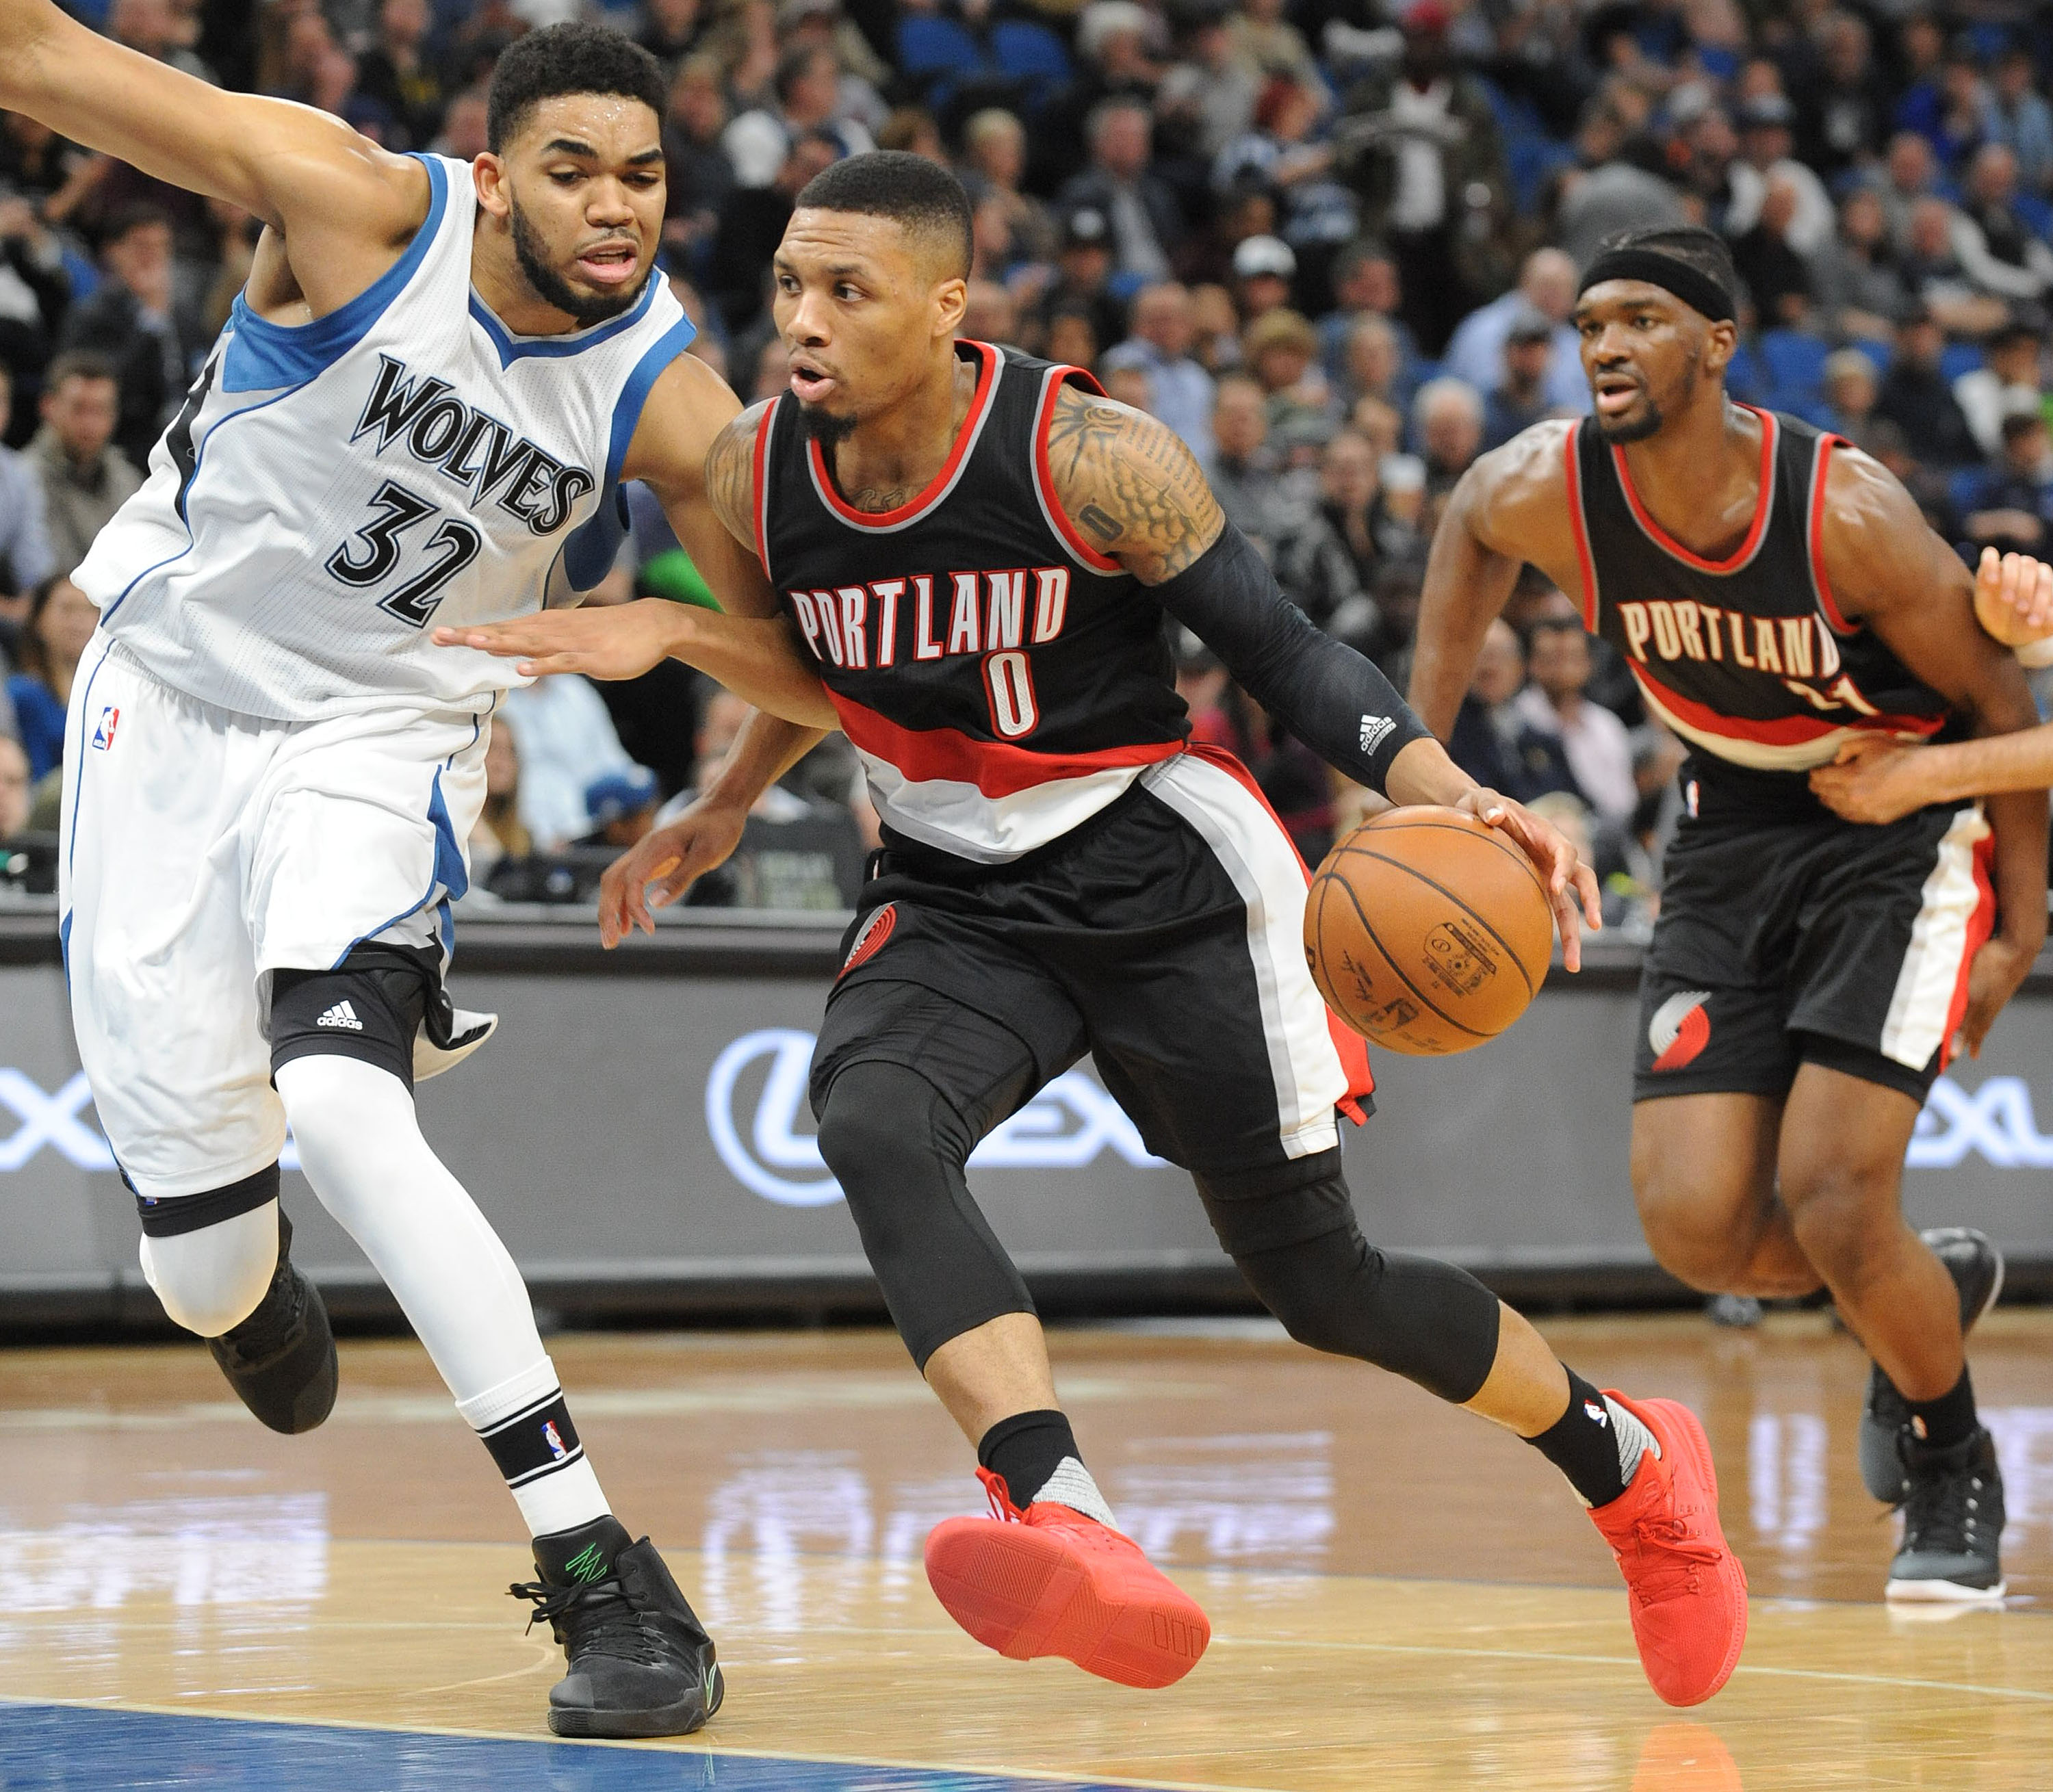 Timberwolves at Trail Blazers live stream: How to watch online3000 x 2619